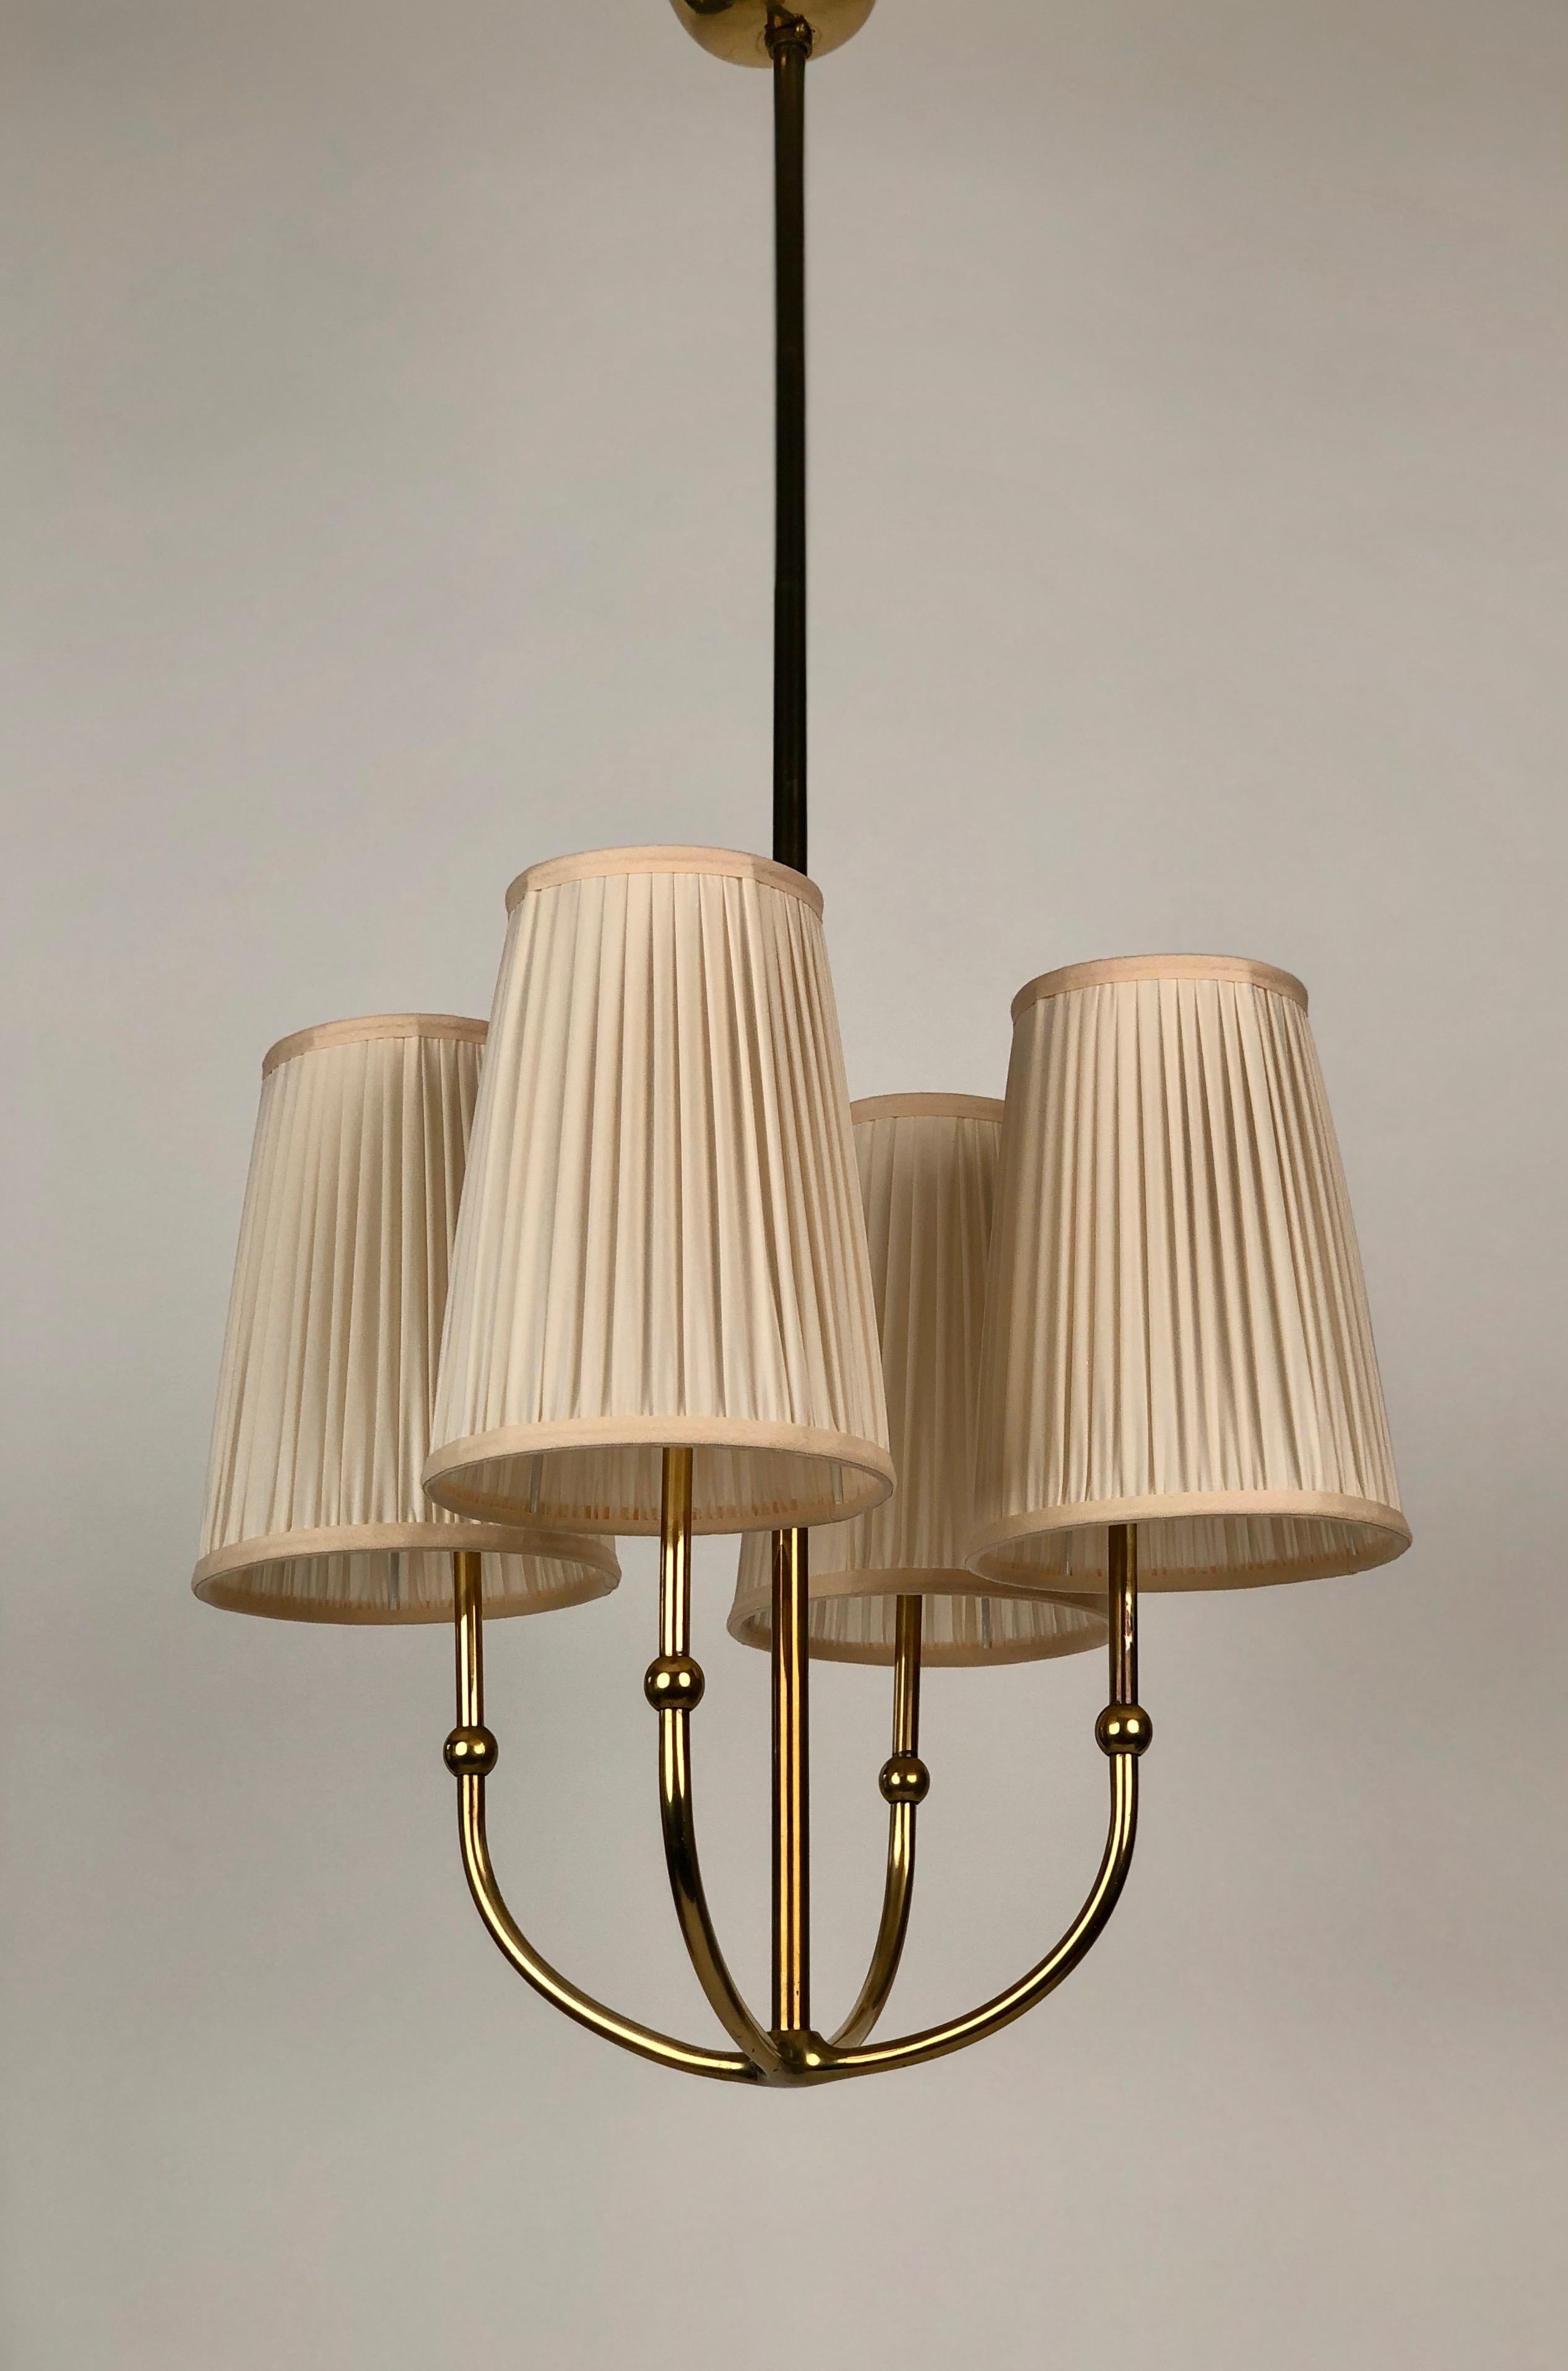 Polished Four Arm Chandelier in Brass with Silk Shades , 1930's, Austria For Sale